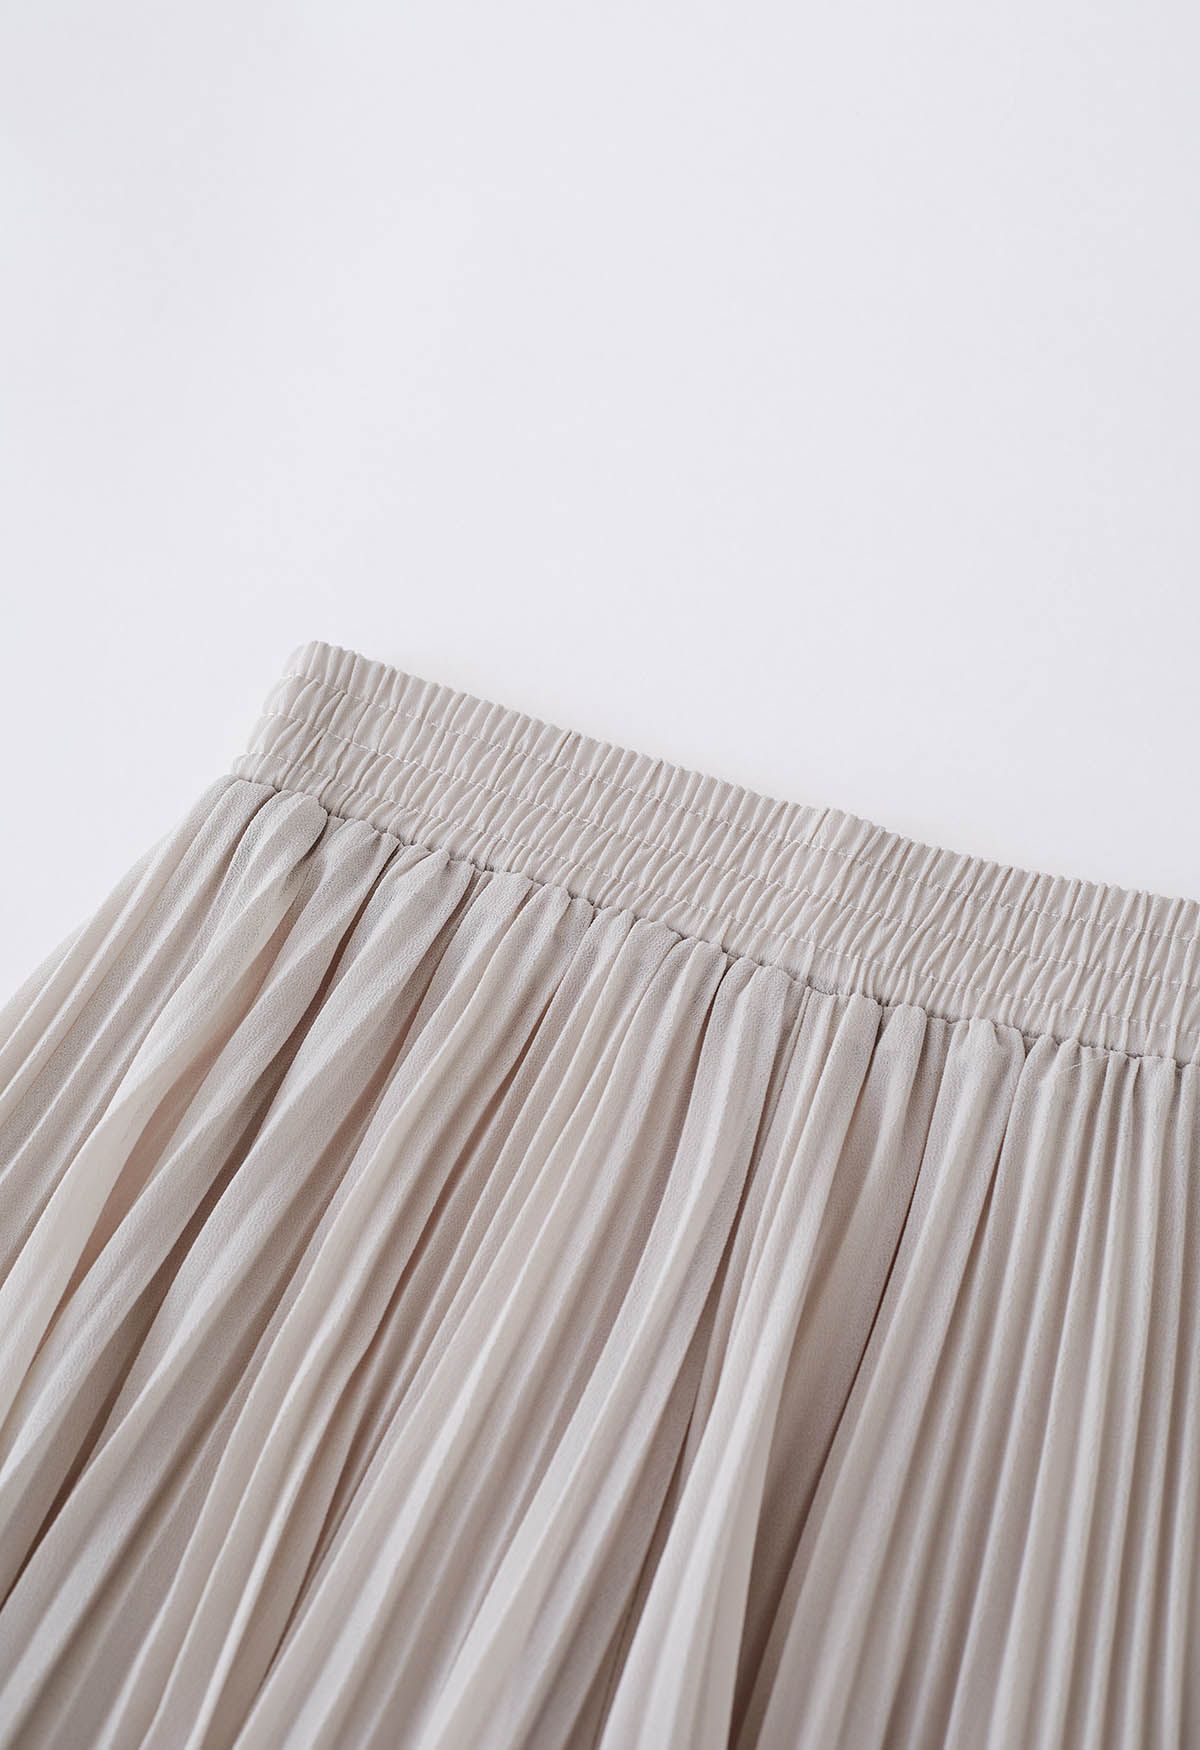 Full Pleats Wide Leg Pull-On Pants in Taupe